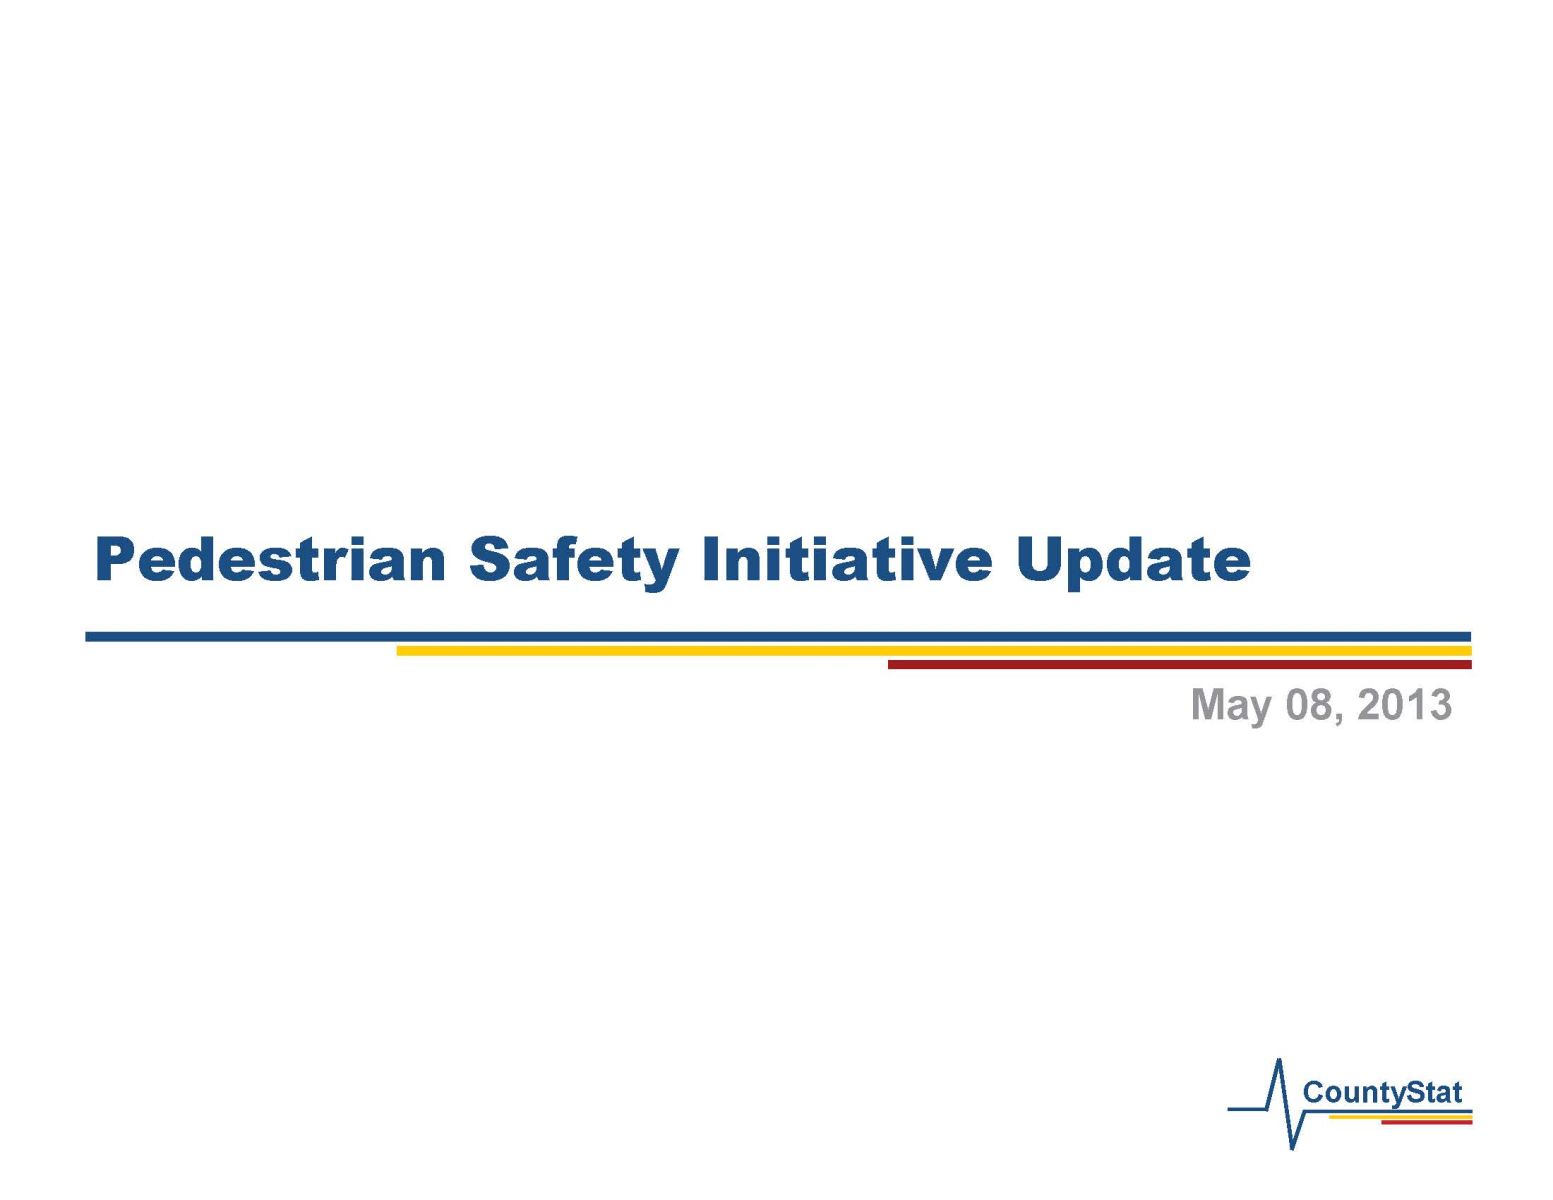 May 8, 2013 County Stat Pedestrian Safety Presentation